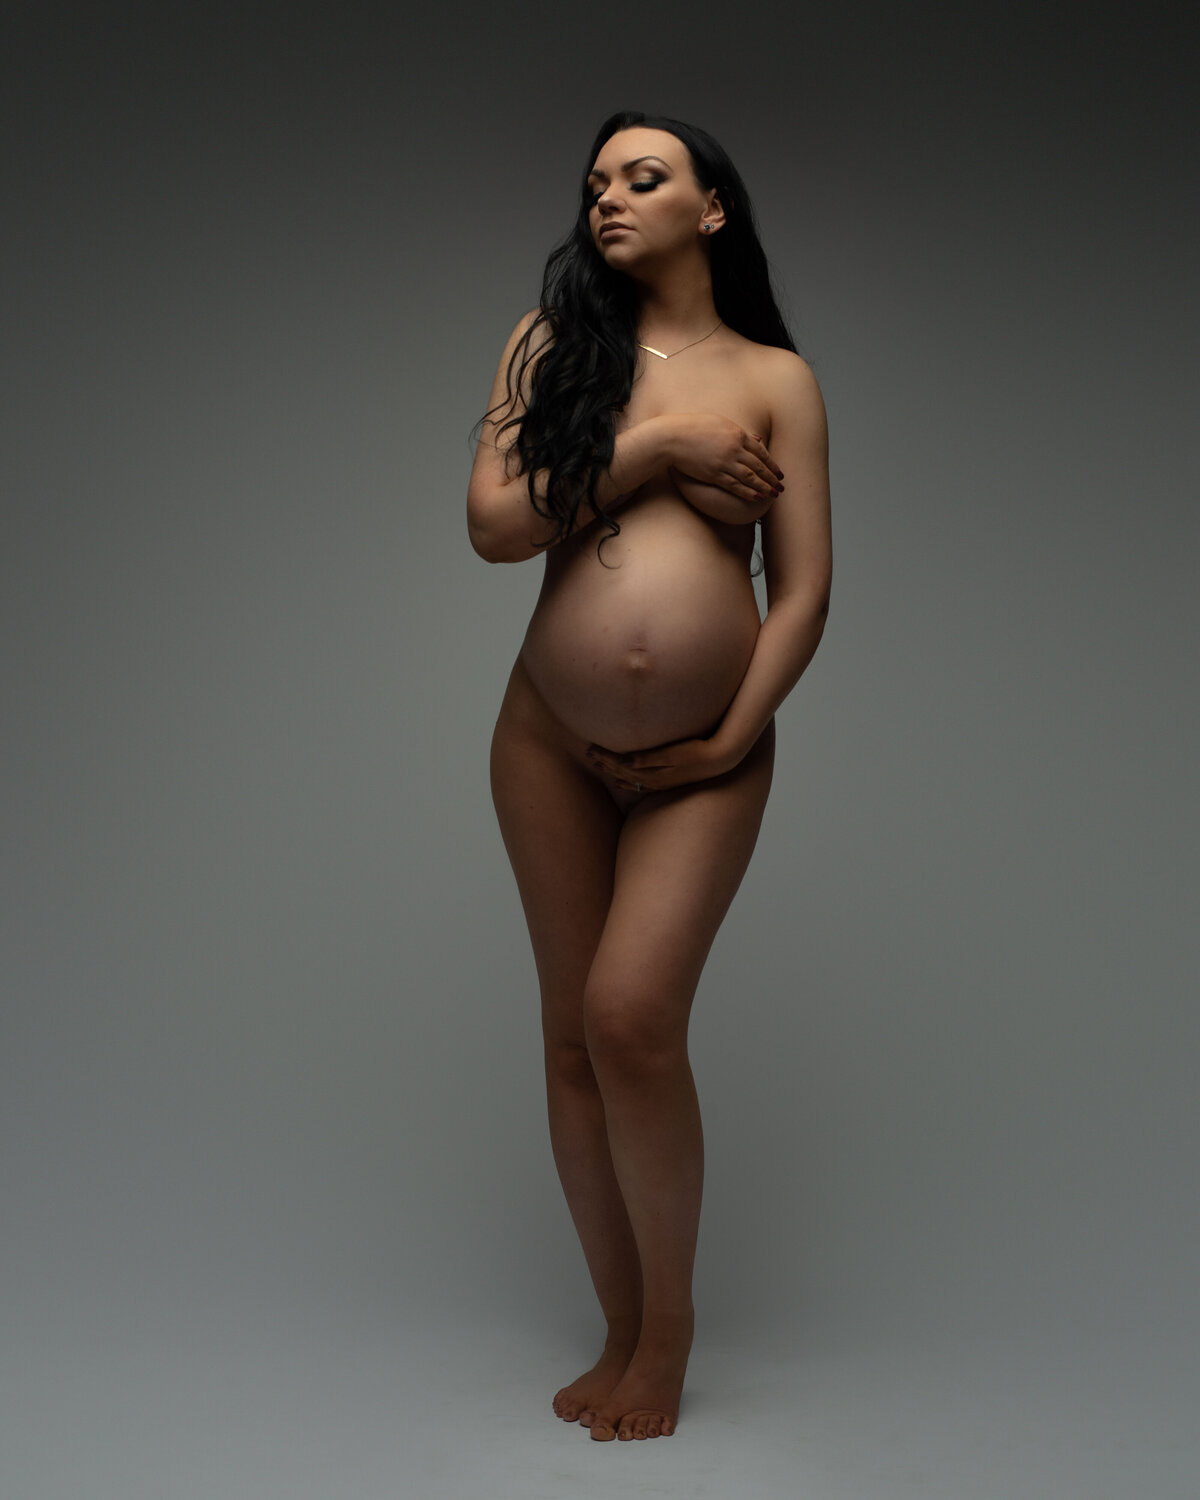 Nude maternity photograph with long haired woman standing holding one hand on tummy and other hand covering breasts.